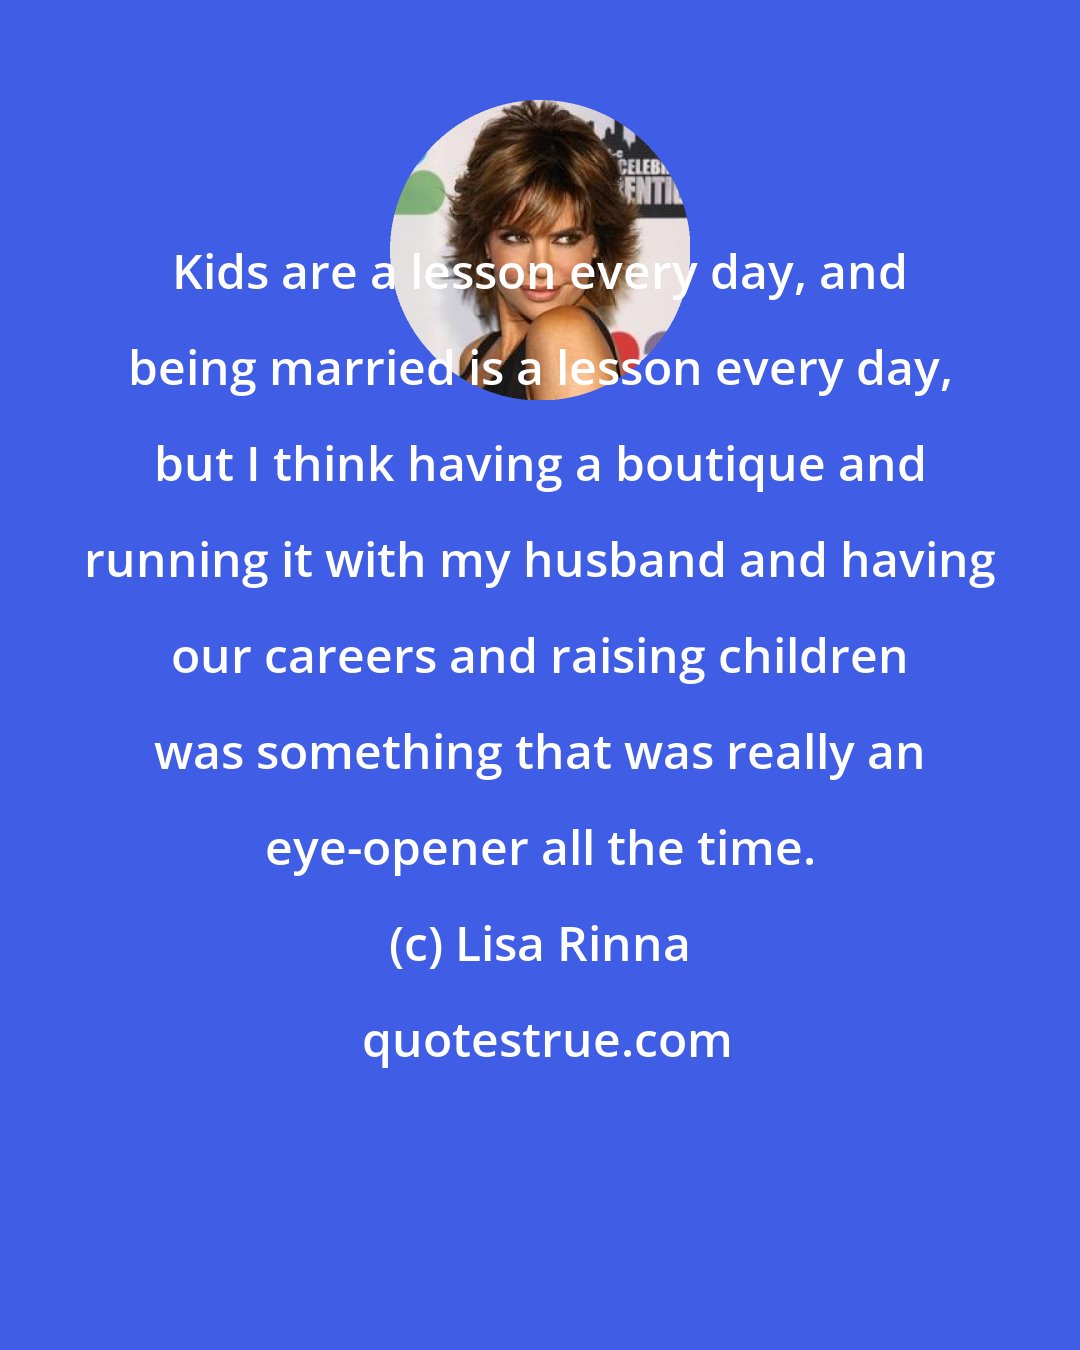 Lisa Rinna: Kids are a lesson every day, and being married is a lesson every day, but I think having a boutique and running it with my husband and having our careers and raising children was something that was really an eye-opener all the time.